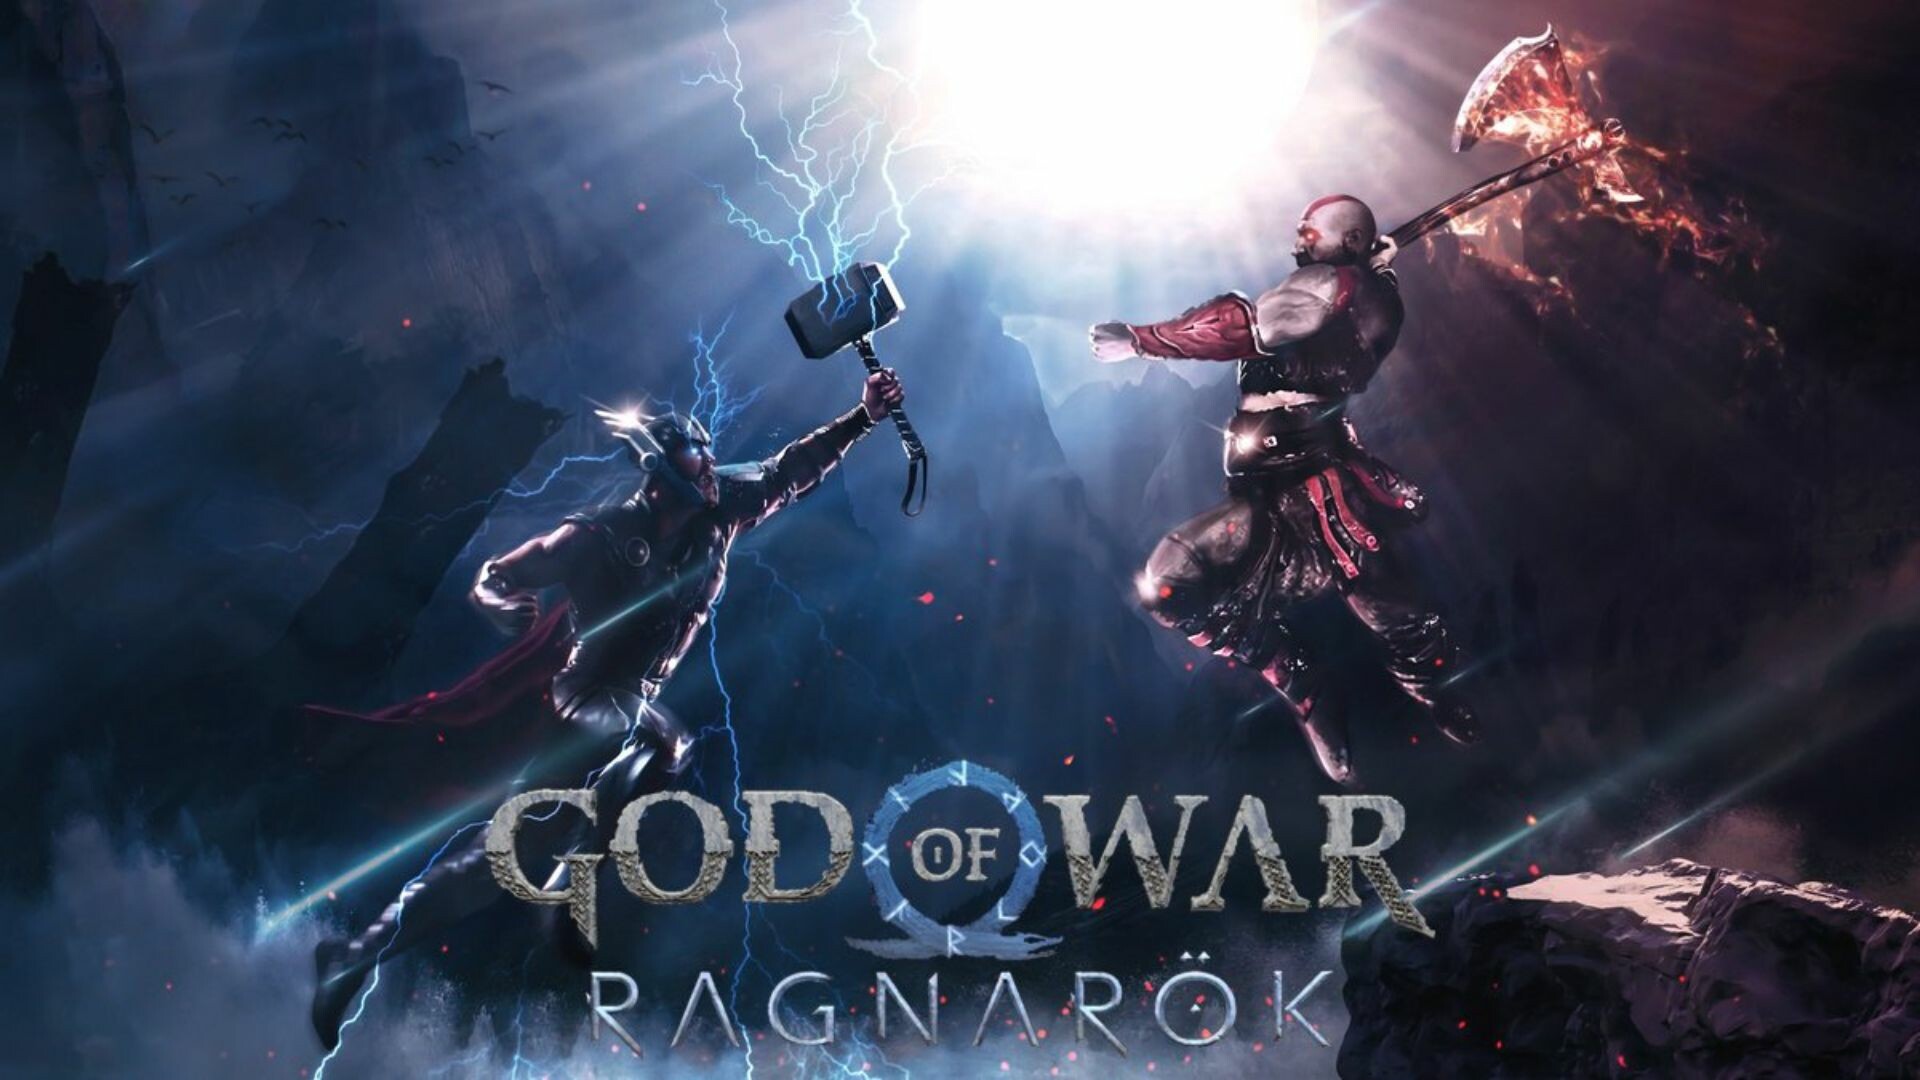 God of War: Ragnarok: The game received the award for Most Wanted Game at the 2020 Golden Joystick Awards. 1920x1080 Full HD Background.